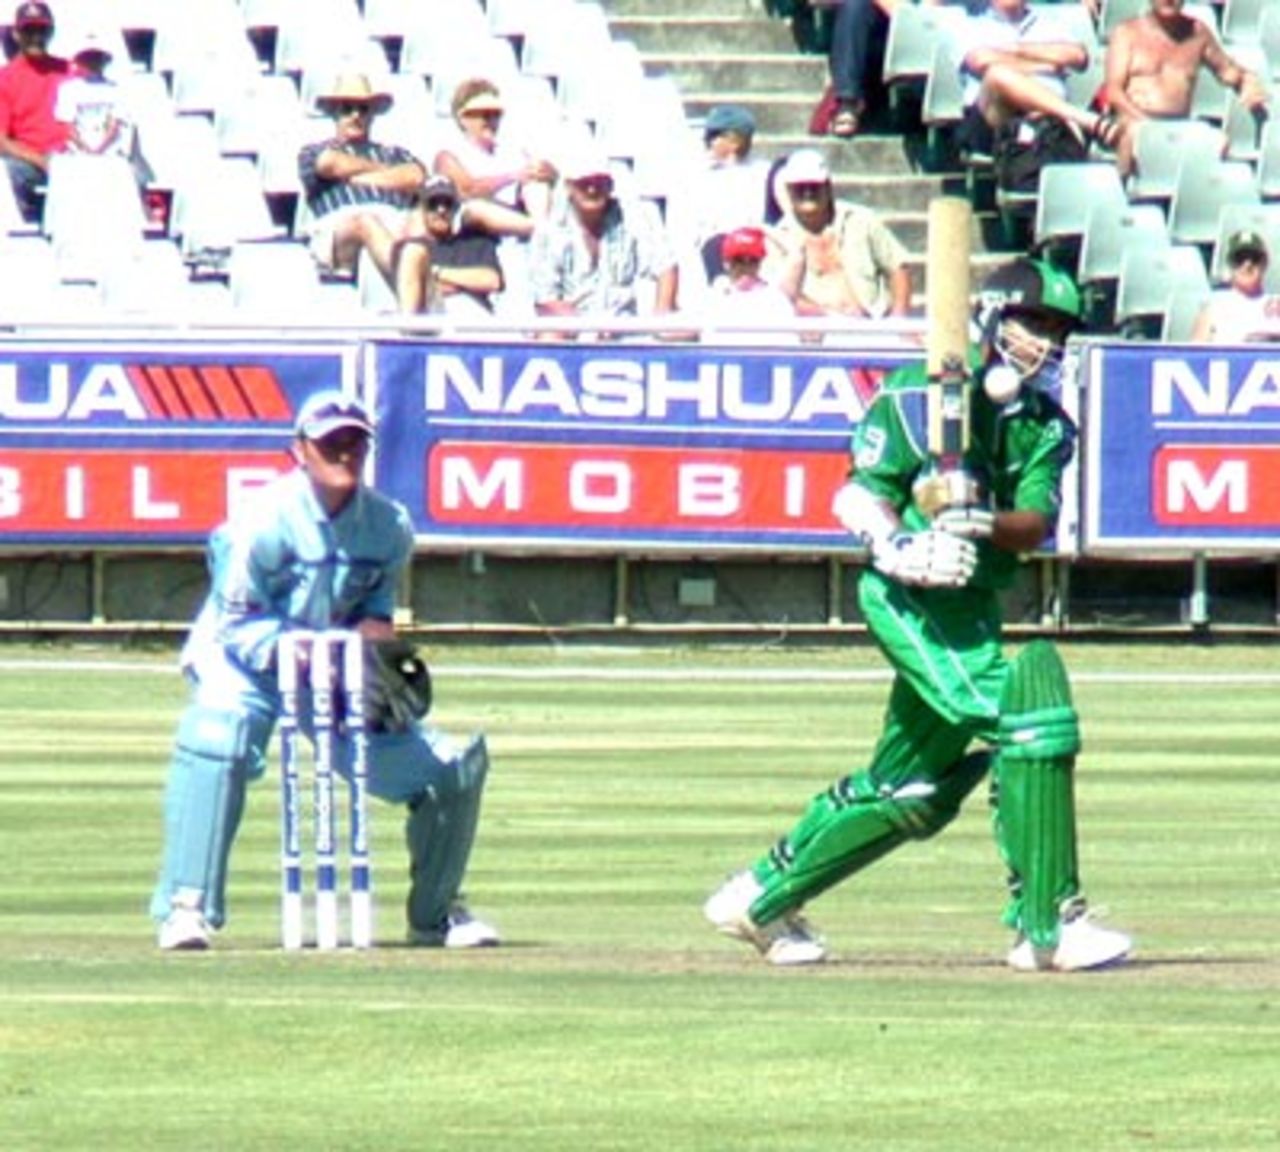 Dolphin's opening bat Goolam Bodi plays a ball to the legside against the Titans